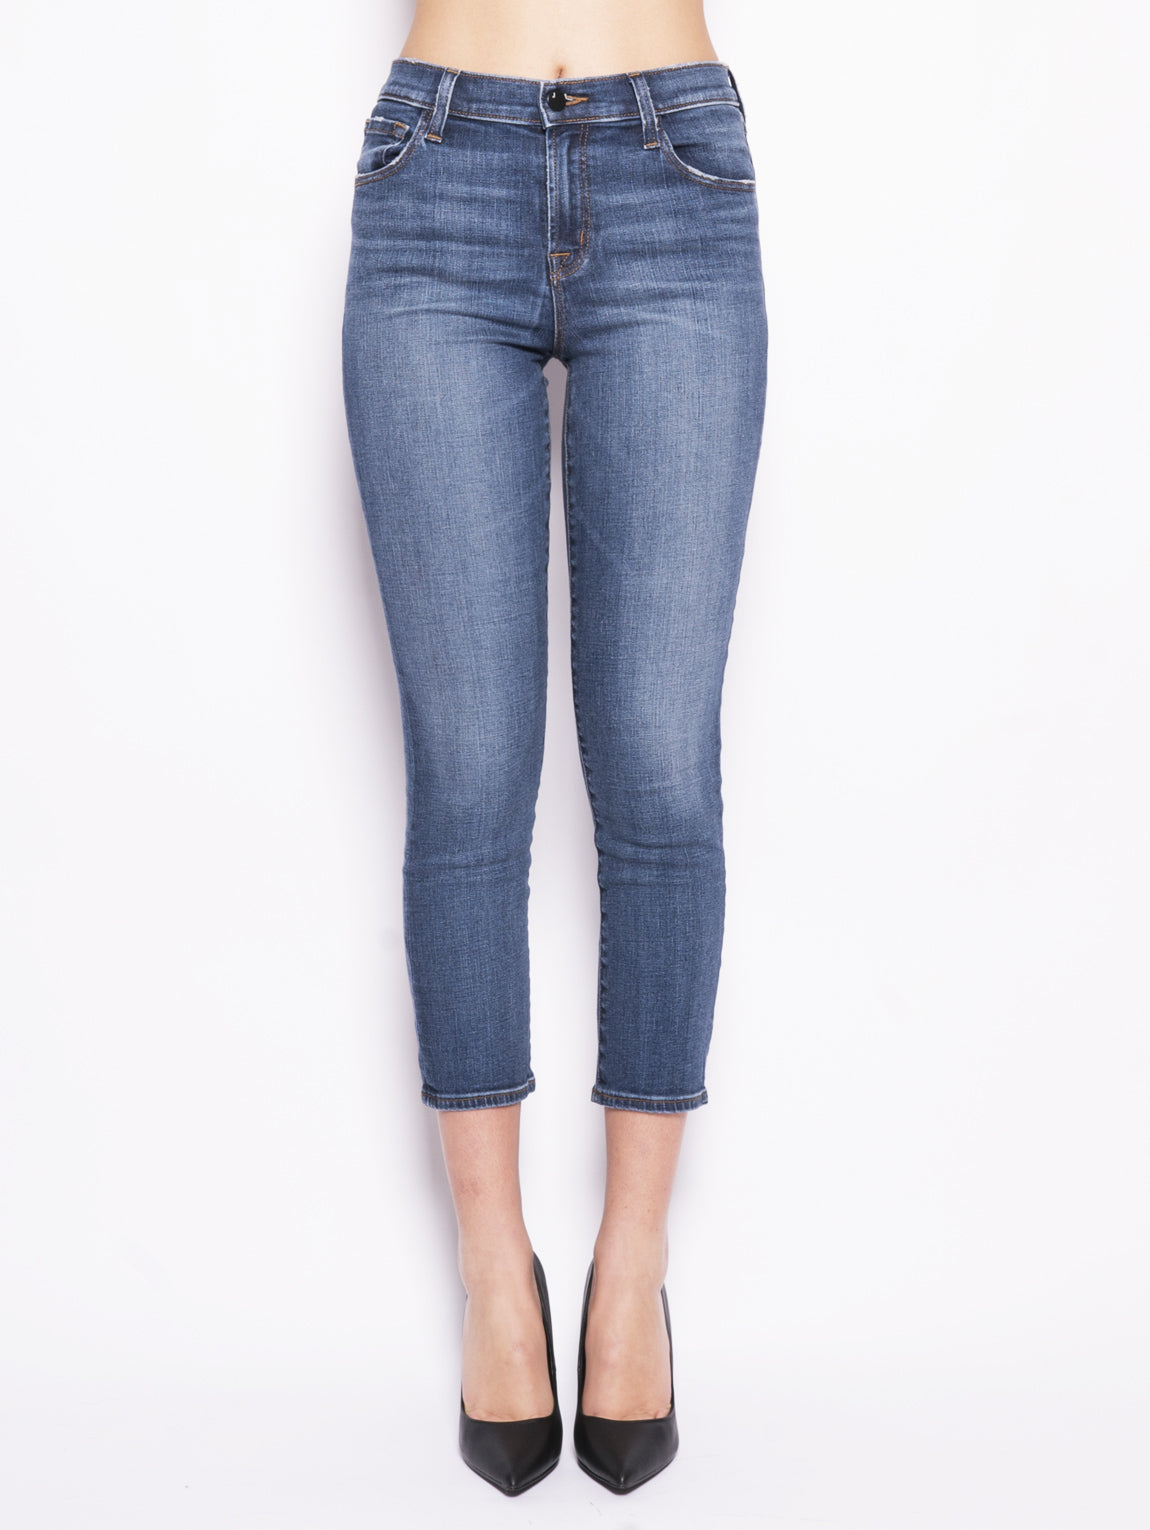 J BRAND-Jeans Ruby High Rise Crop-TRYME Shop